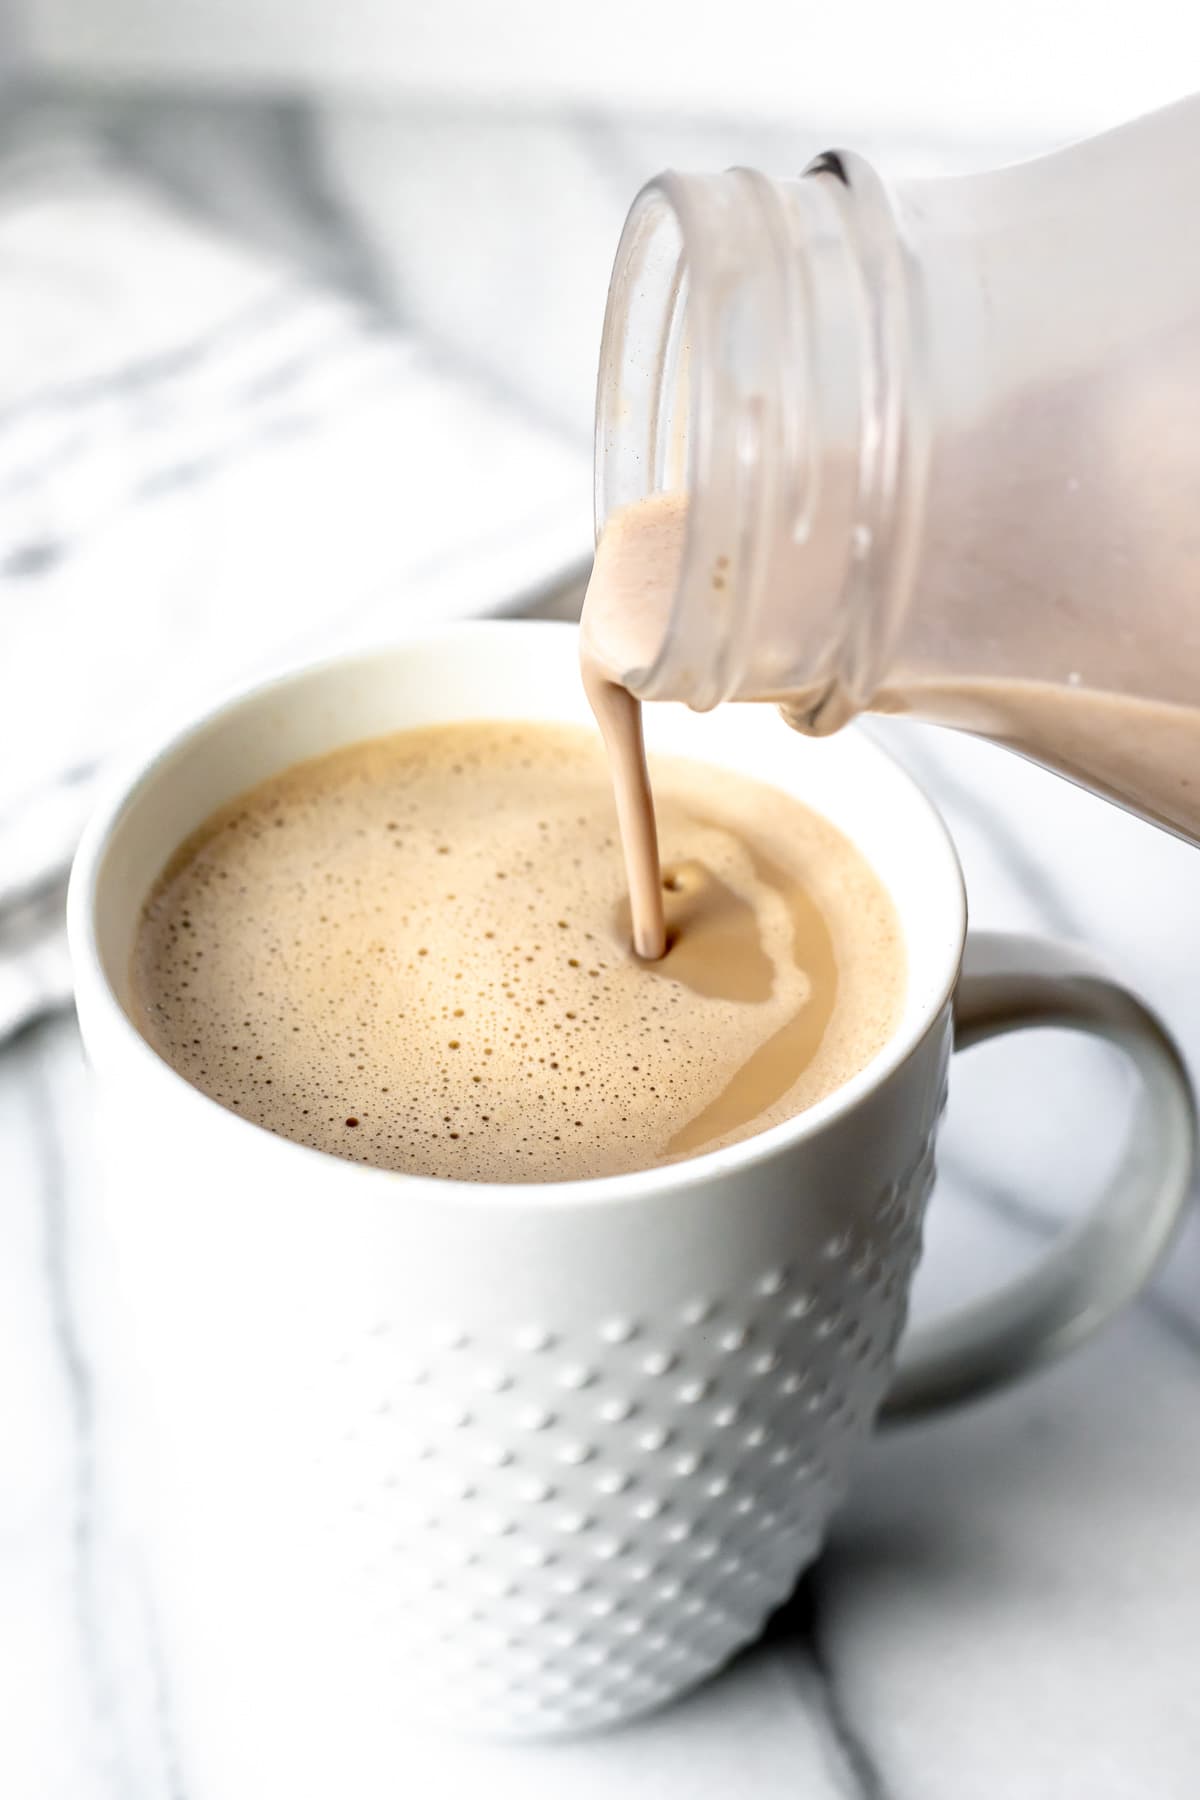 Irish cream coffee creamer being poured into a white mug of coffee on a marble background.